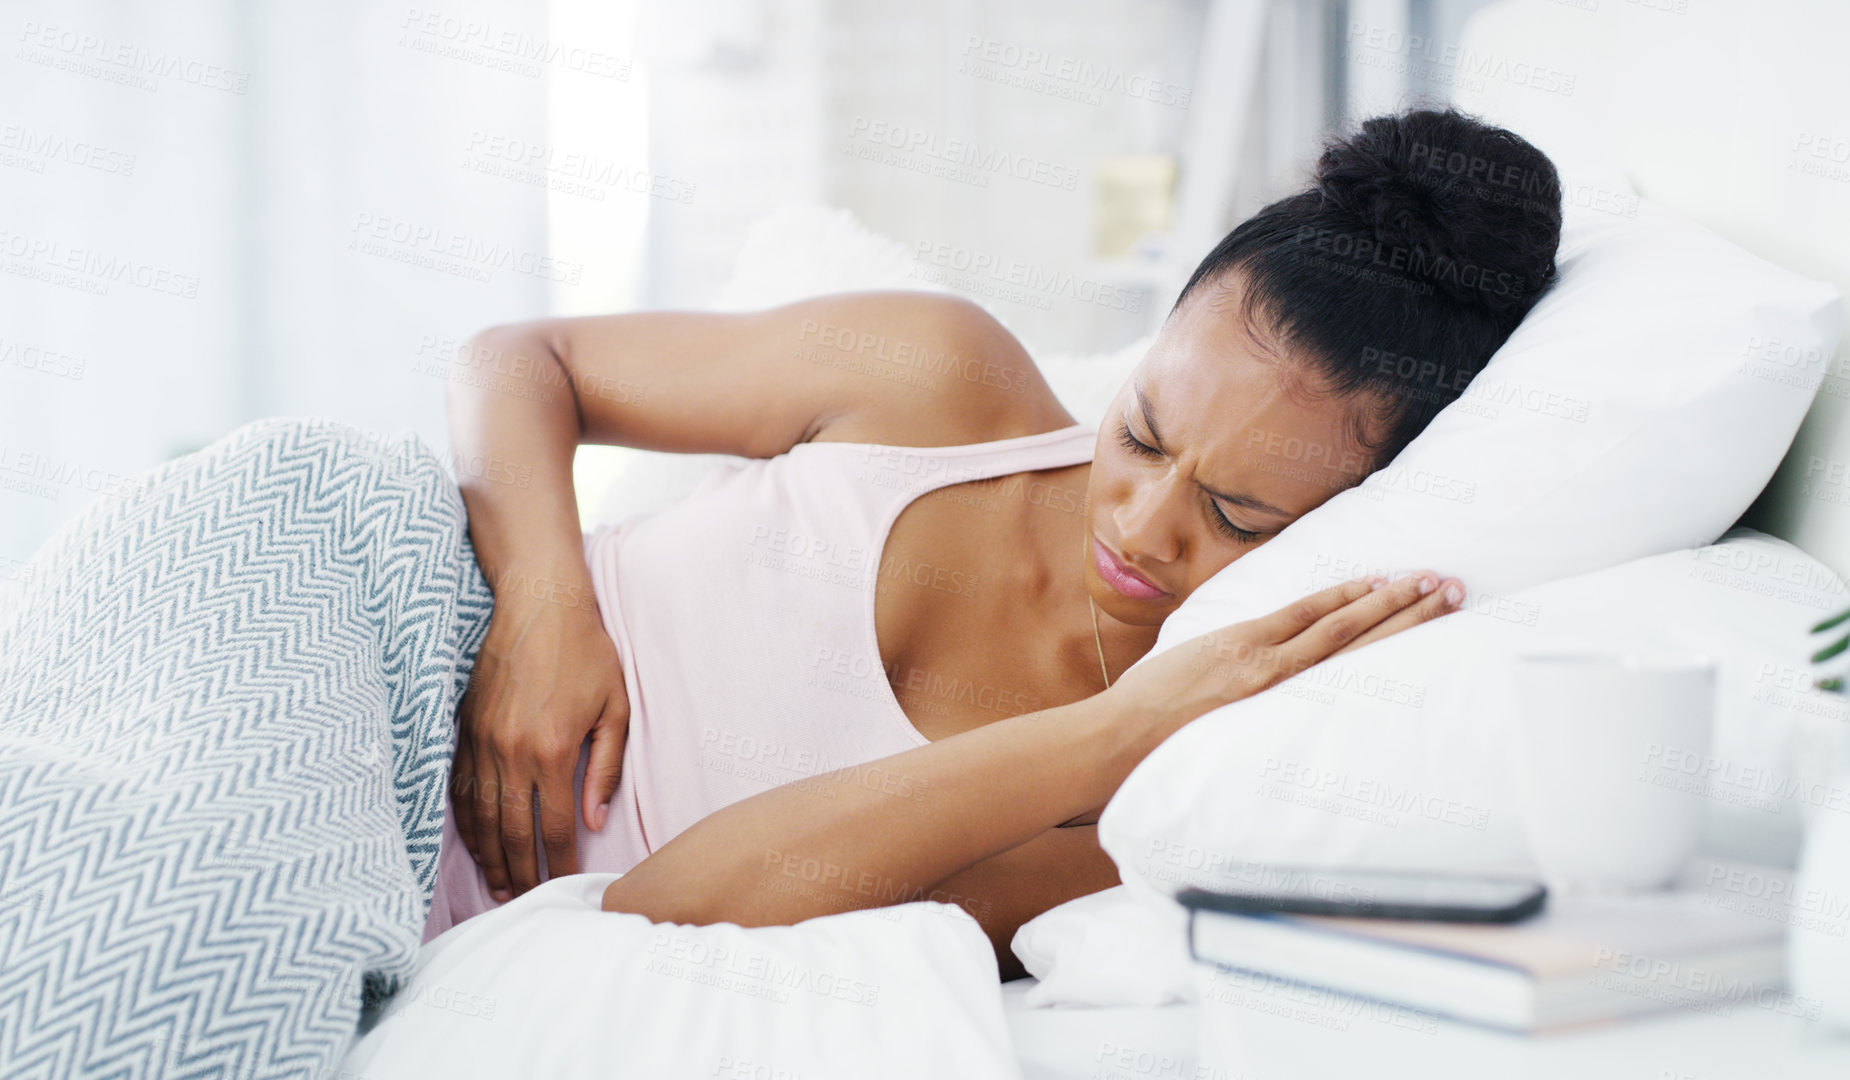 Buy stock photo Shot of an attractive young woman suffering from stomach cramps while lying in her bed at home